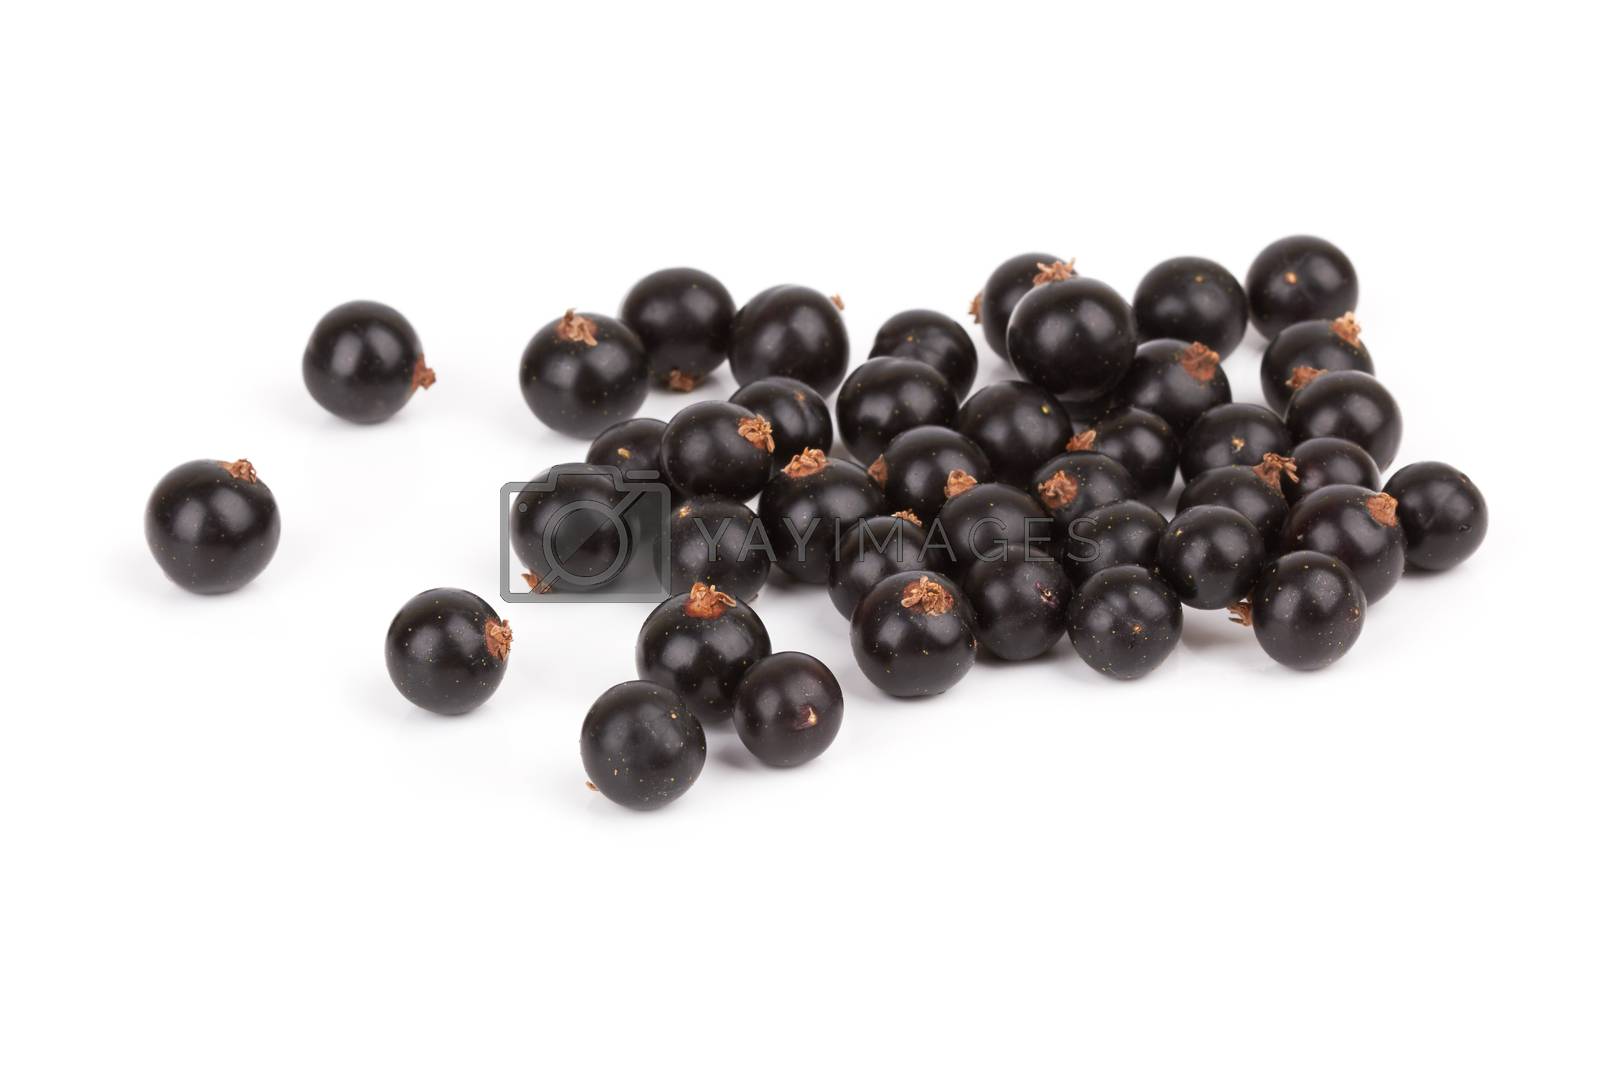 Royalty free image of black currant by pioneer111